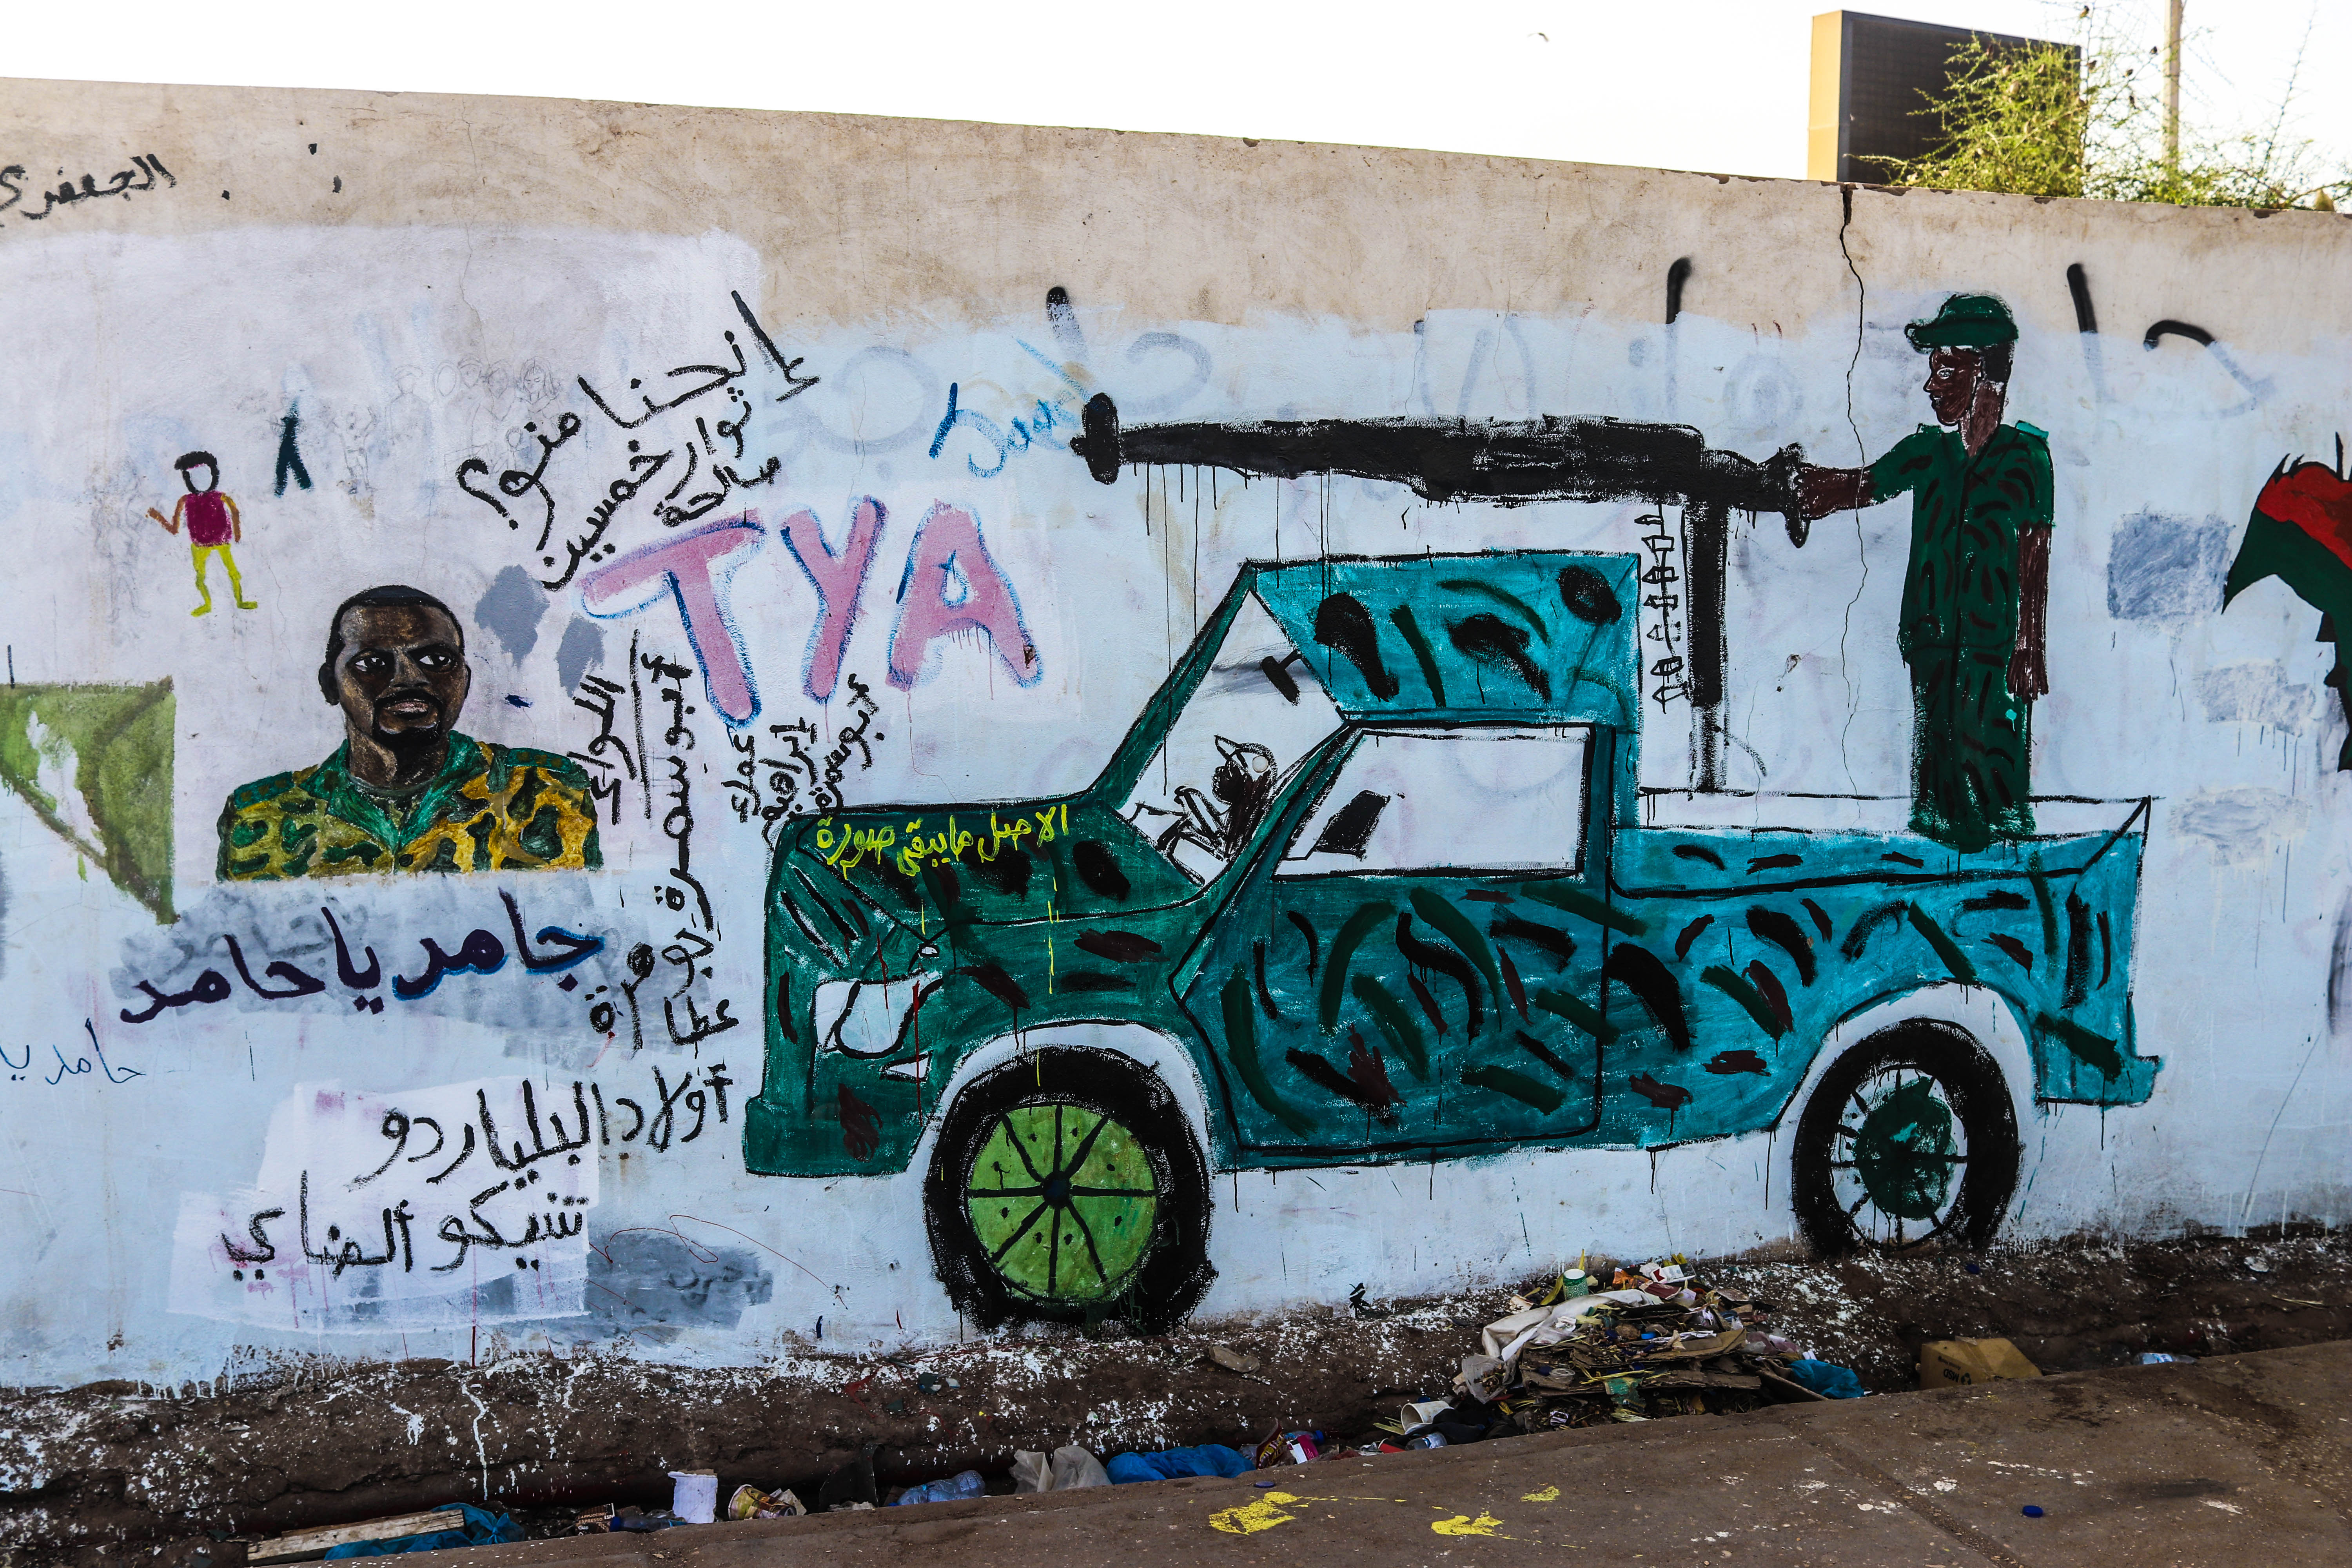 The Sudanese Revolution: the Climax of a Decade of challenging the Political Order